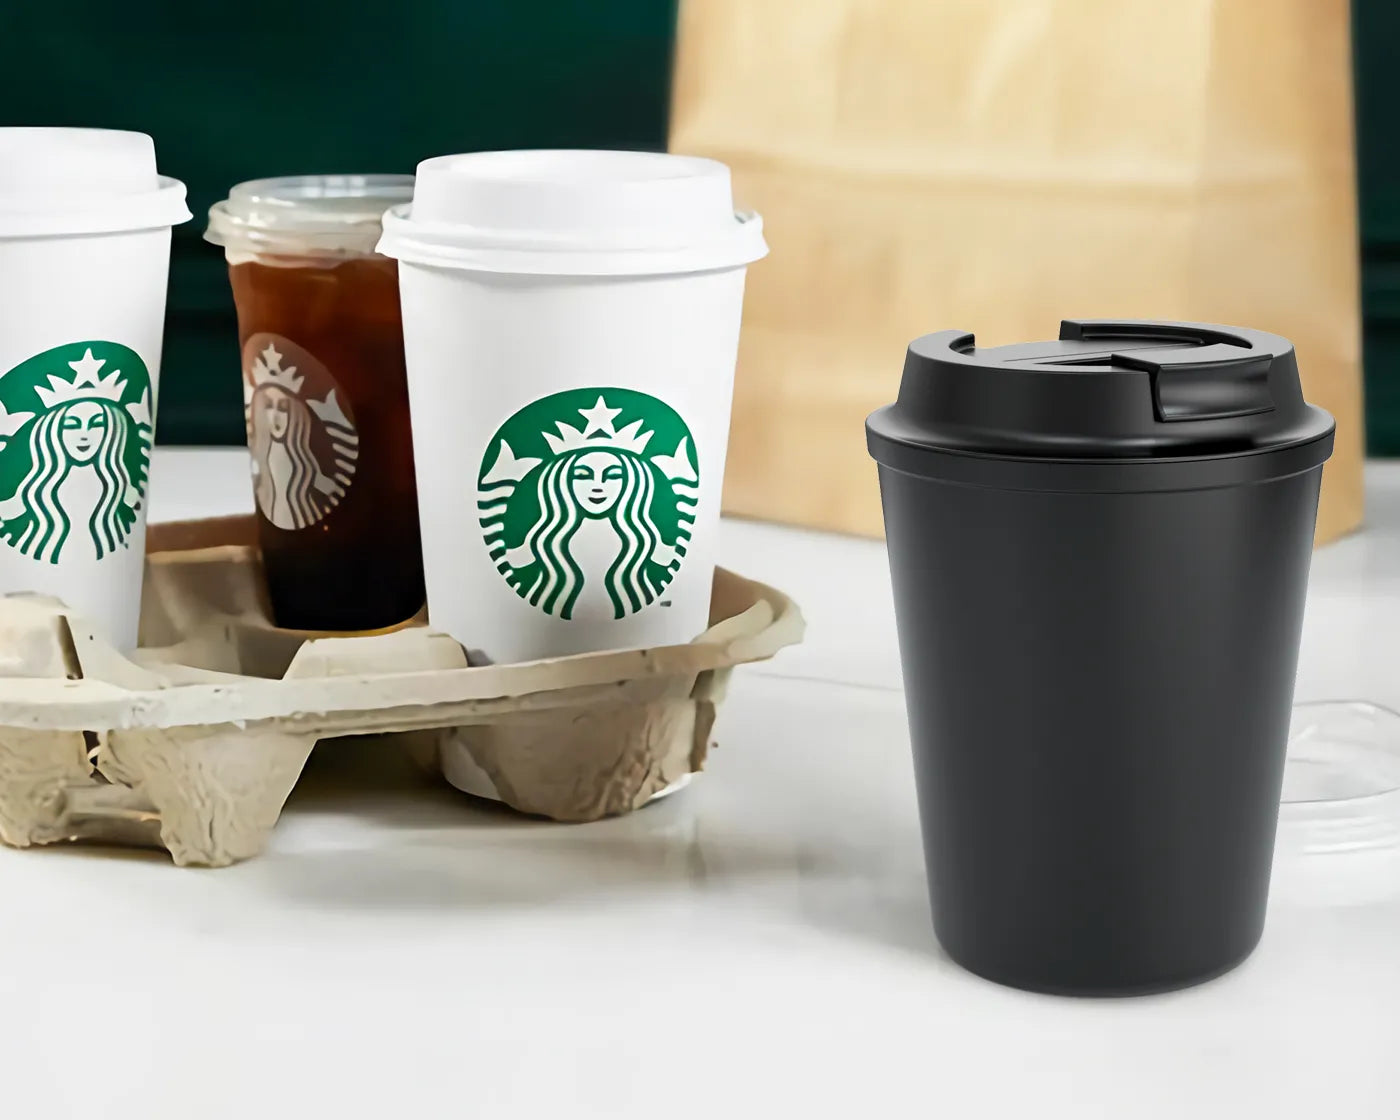 Black reusable coffee cup next to traditional disposable Starbucks cups for sustainable lifestyle.